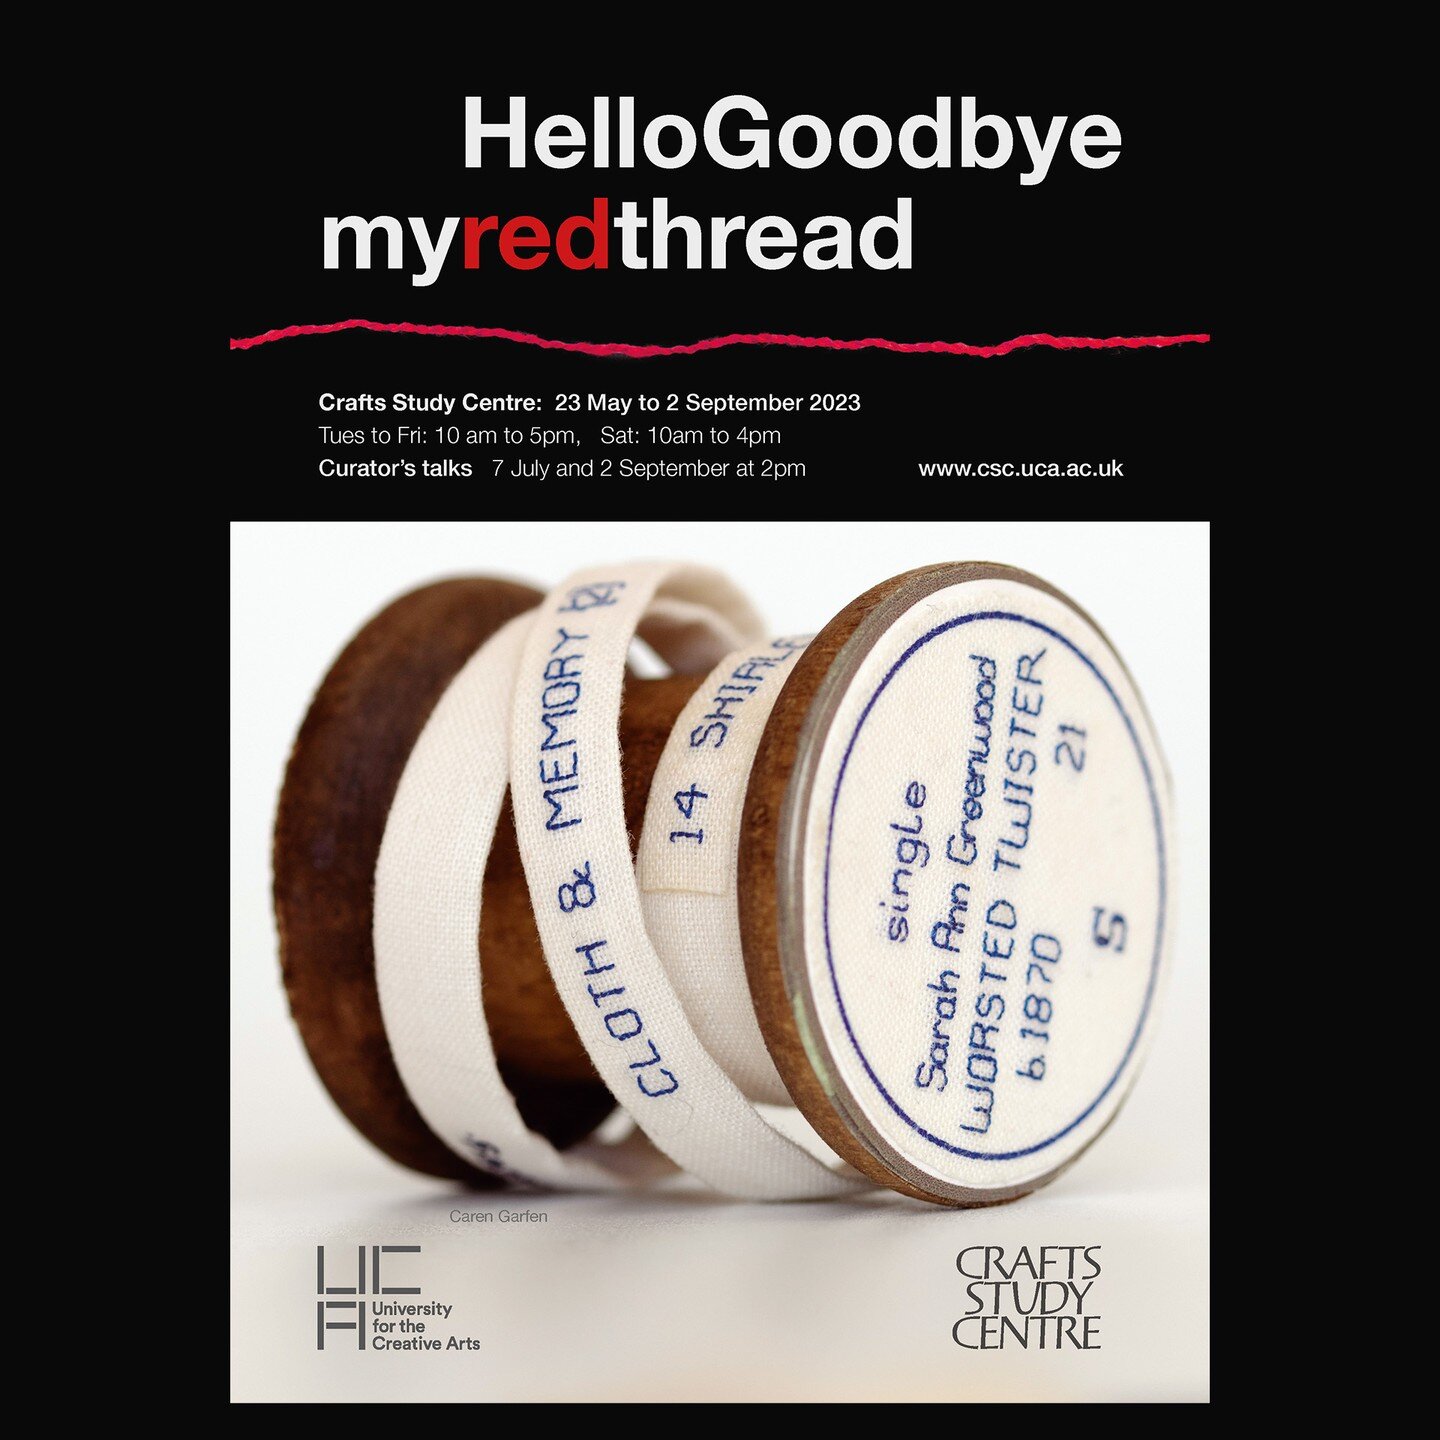 HelloGoodbye : myredthread

Since 1995 Lesley Millar, Professor of Textile Culture and Director of the International Textile Research Centre at UCA, has been working with textile artists and designers from across the world, particularly in Japan. Ove